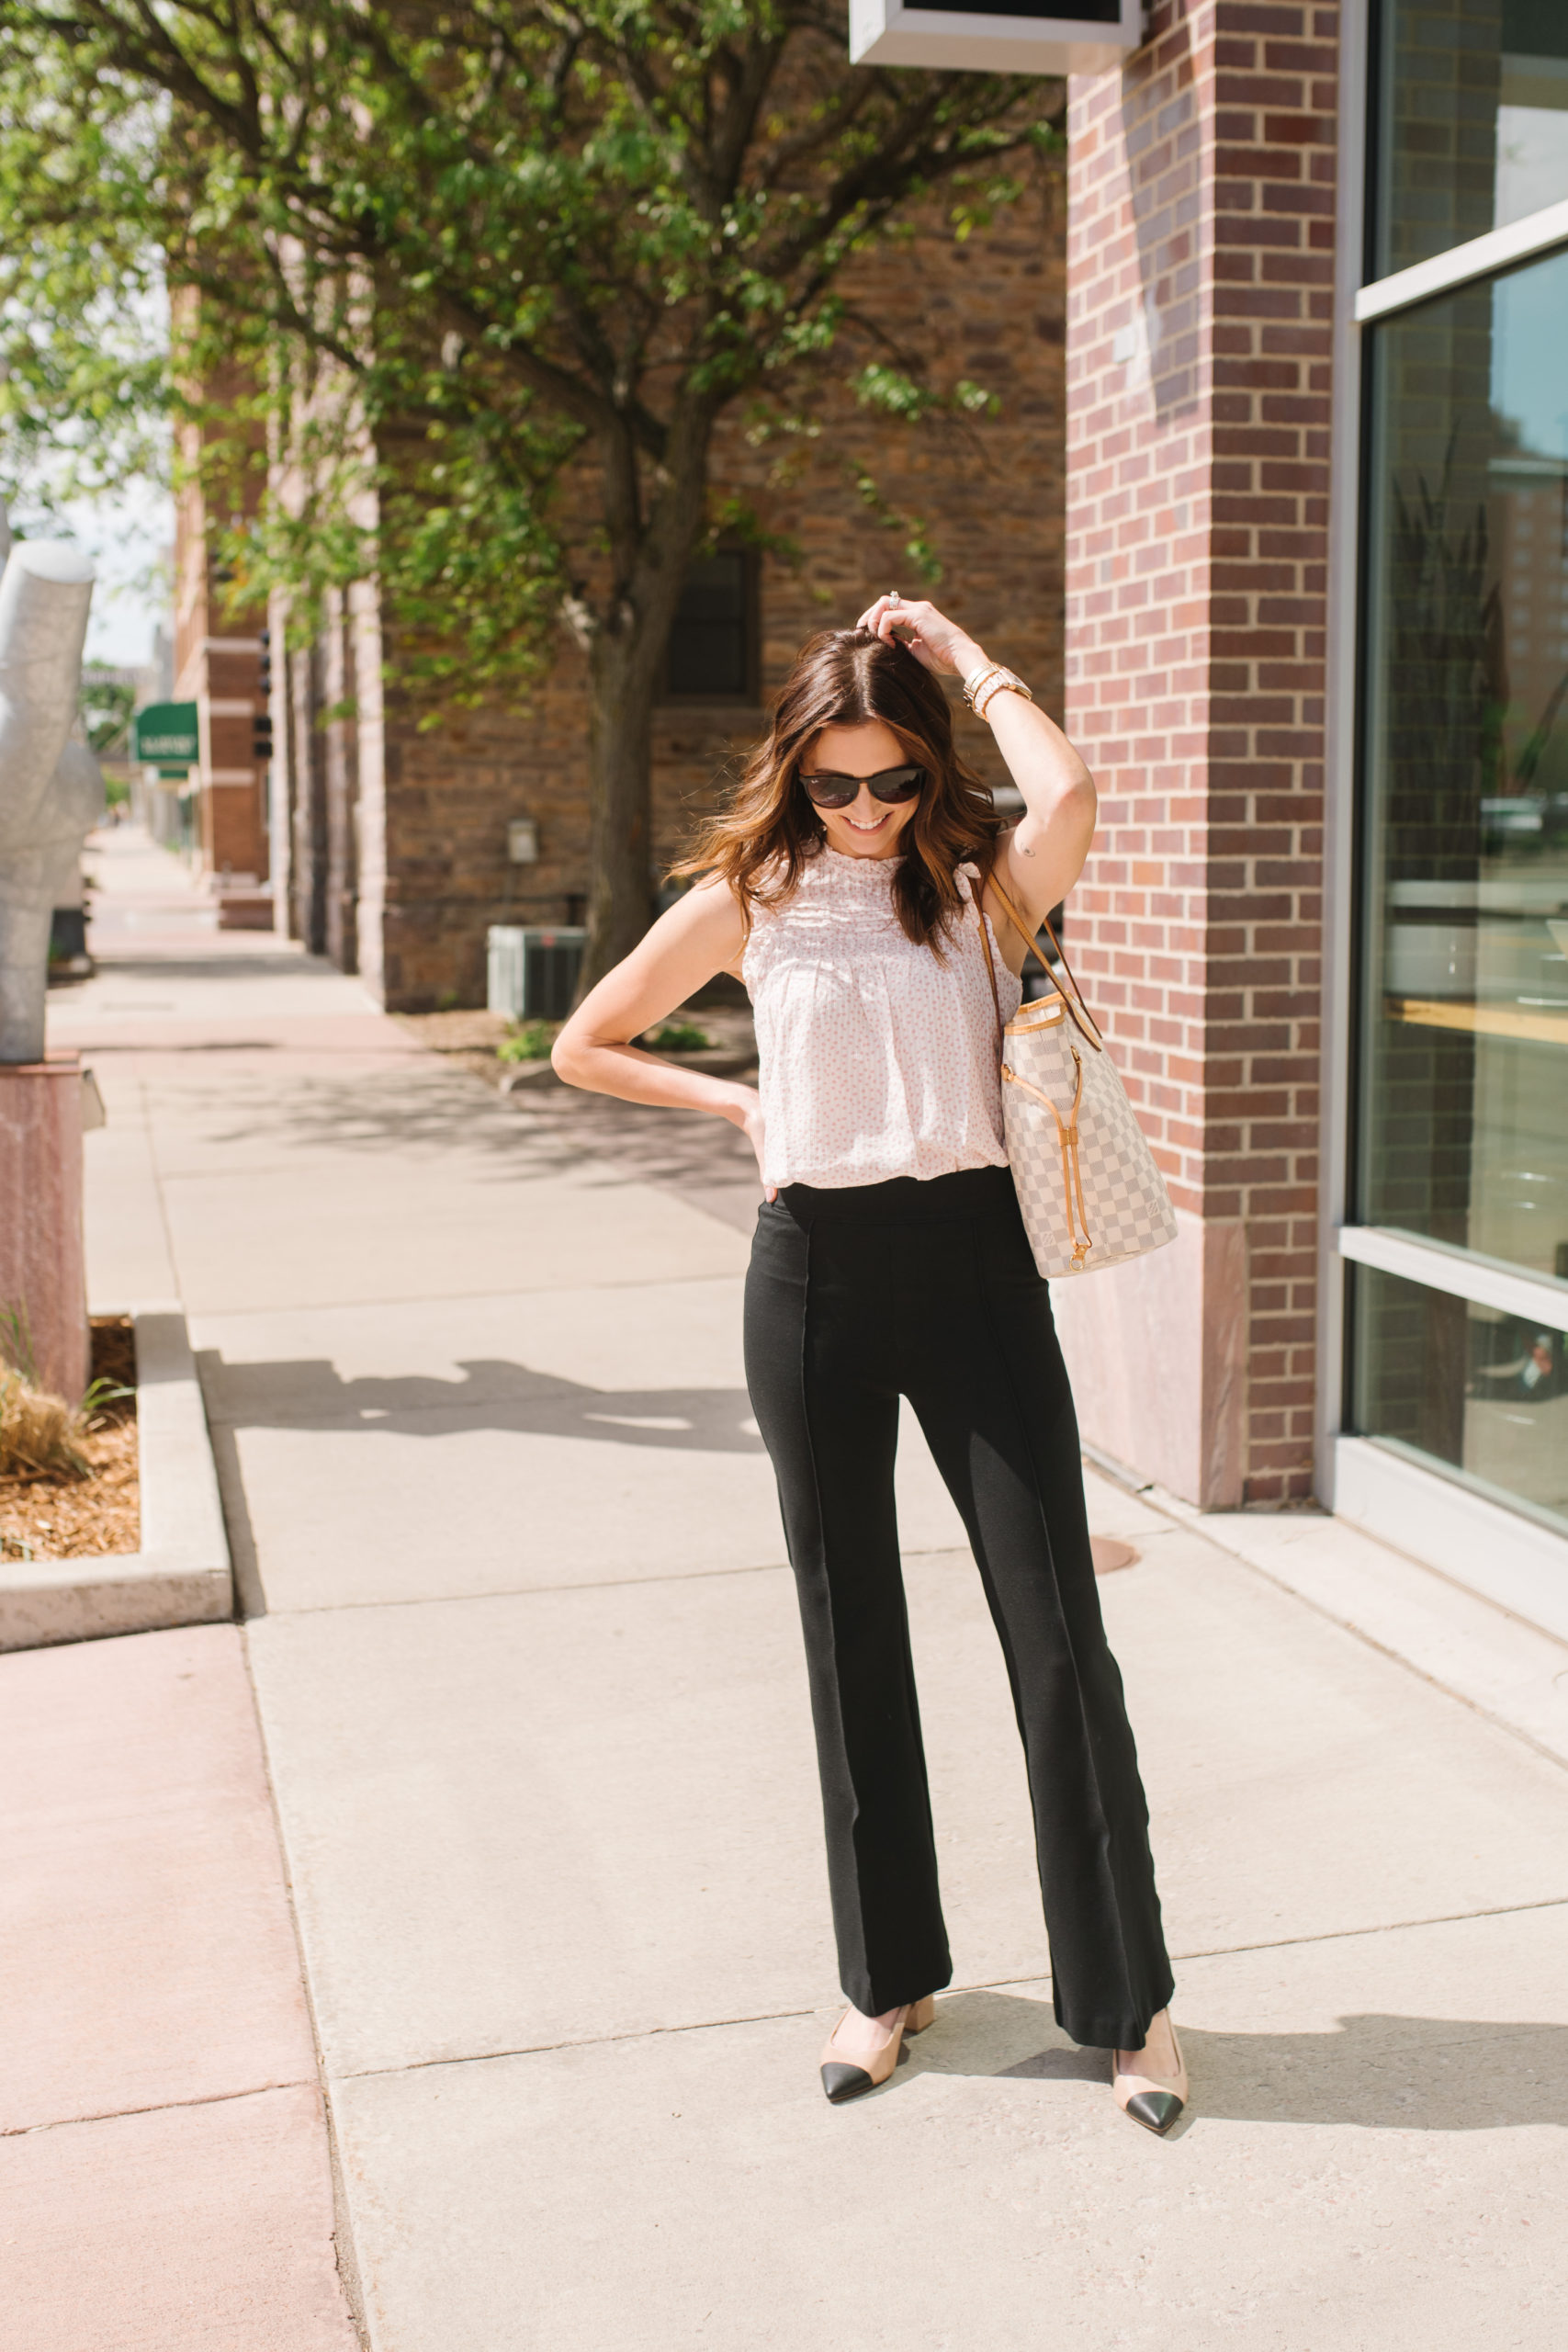 The Only Black Dress Pants You’ll Ever Need | Midwest In Style